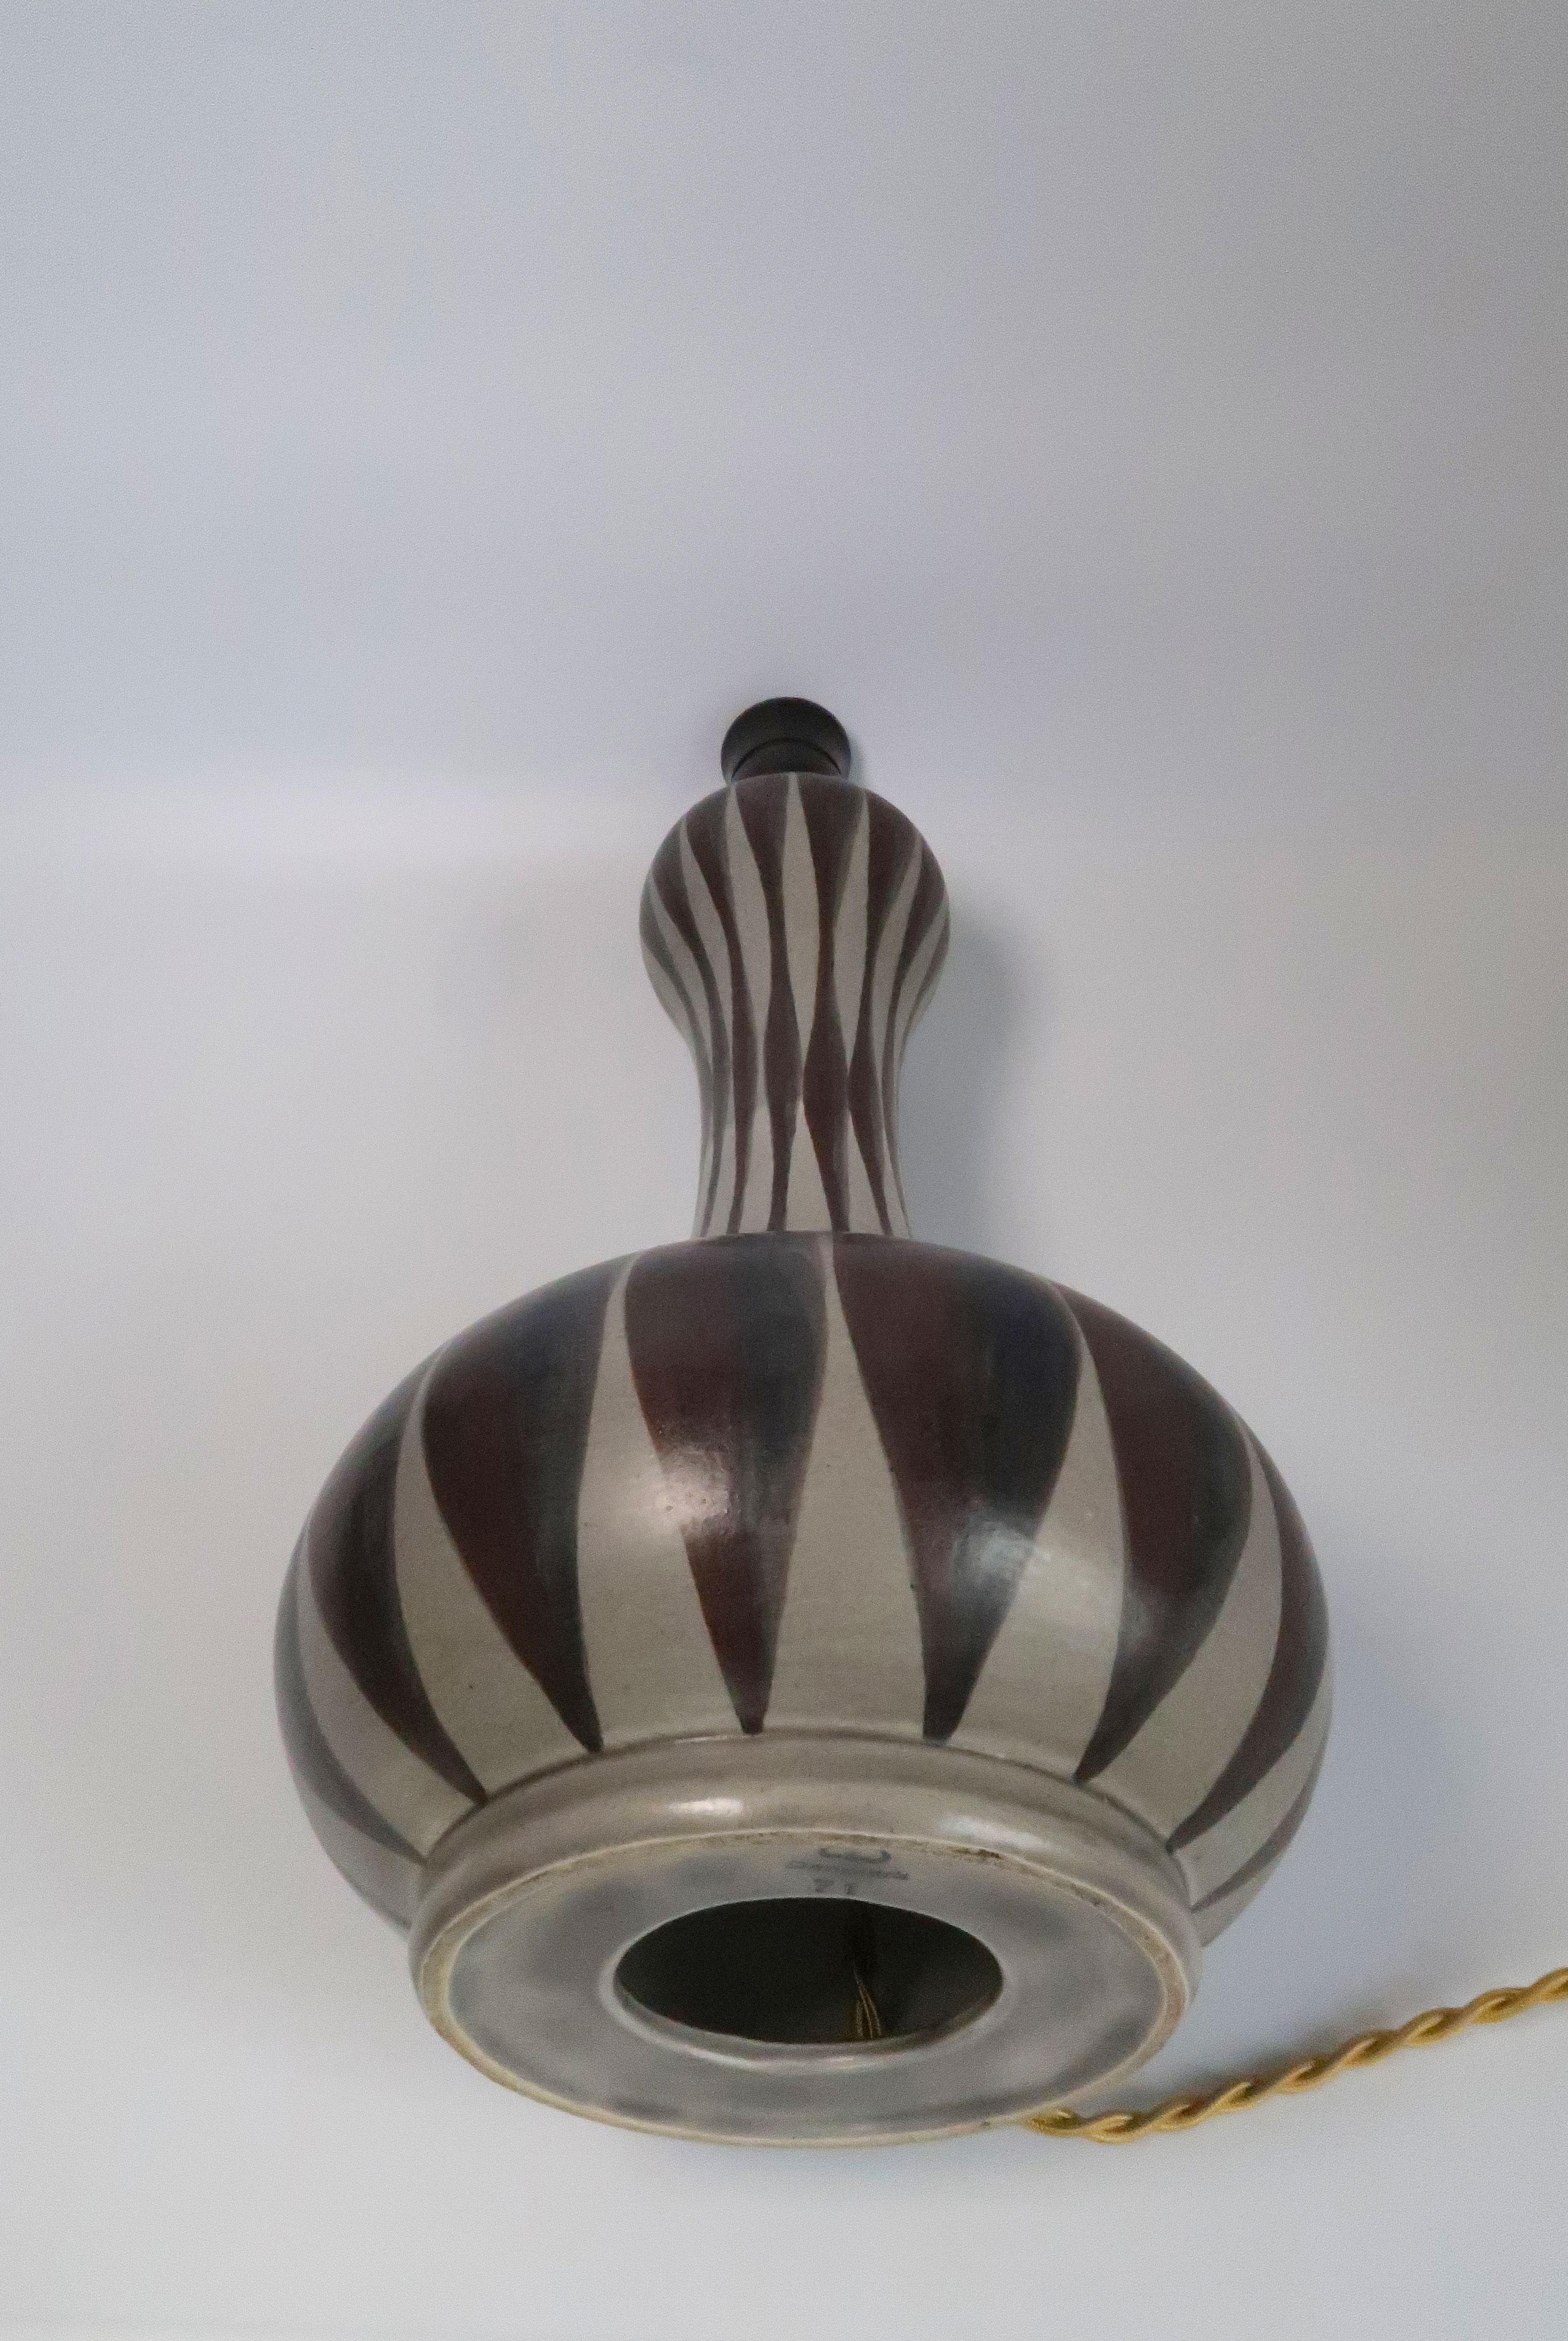 Hand-Painted Danish Modern Striped Hourglass Table Lamp, E & J Andersen, 1960s For Sale